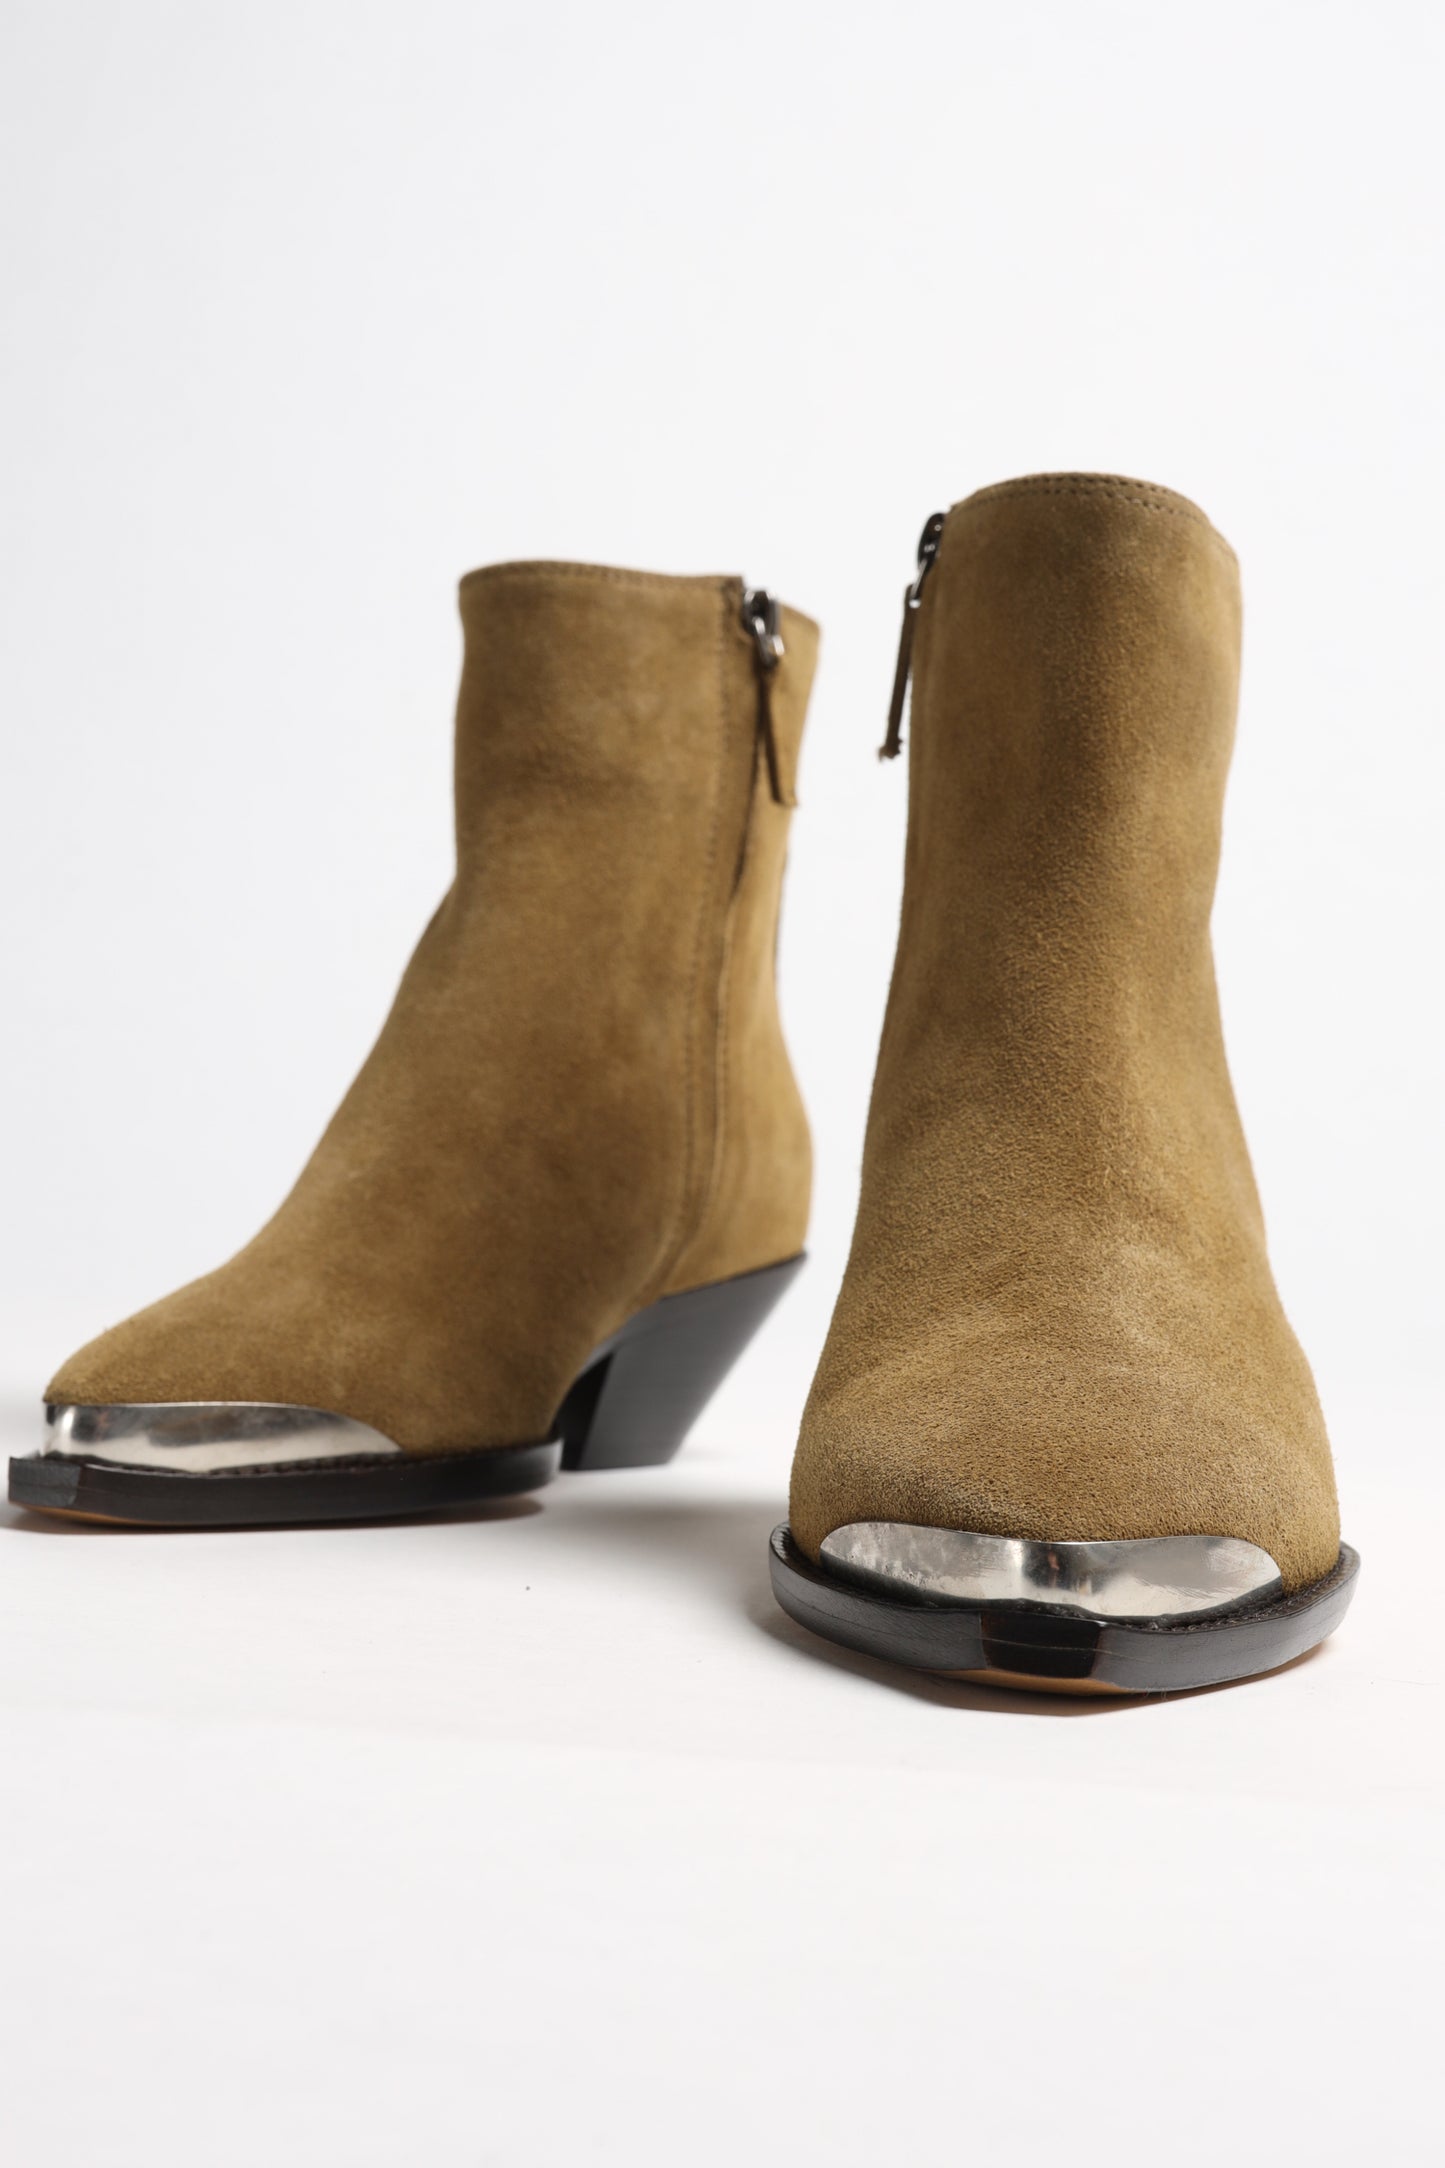 Boots Adnae Suede in TaupeIsabel Marant - Anita Hass